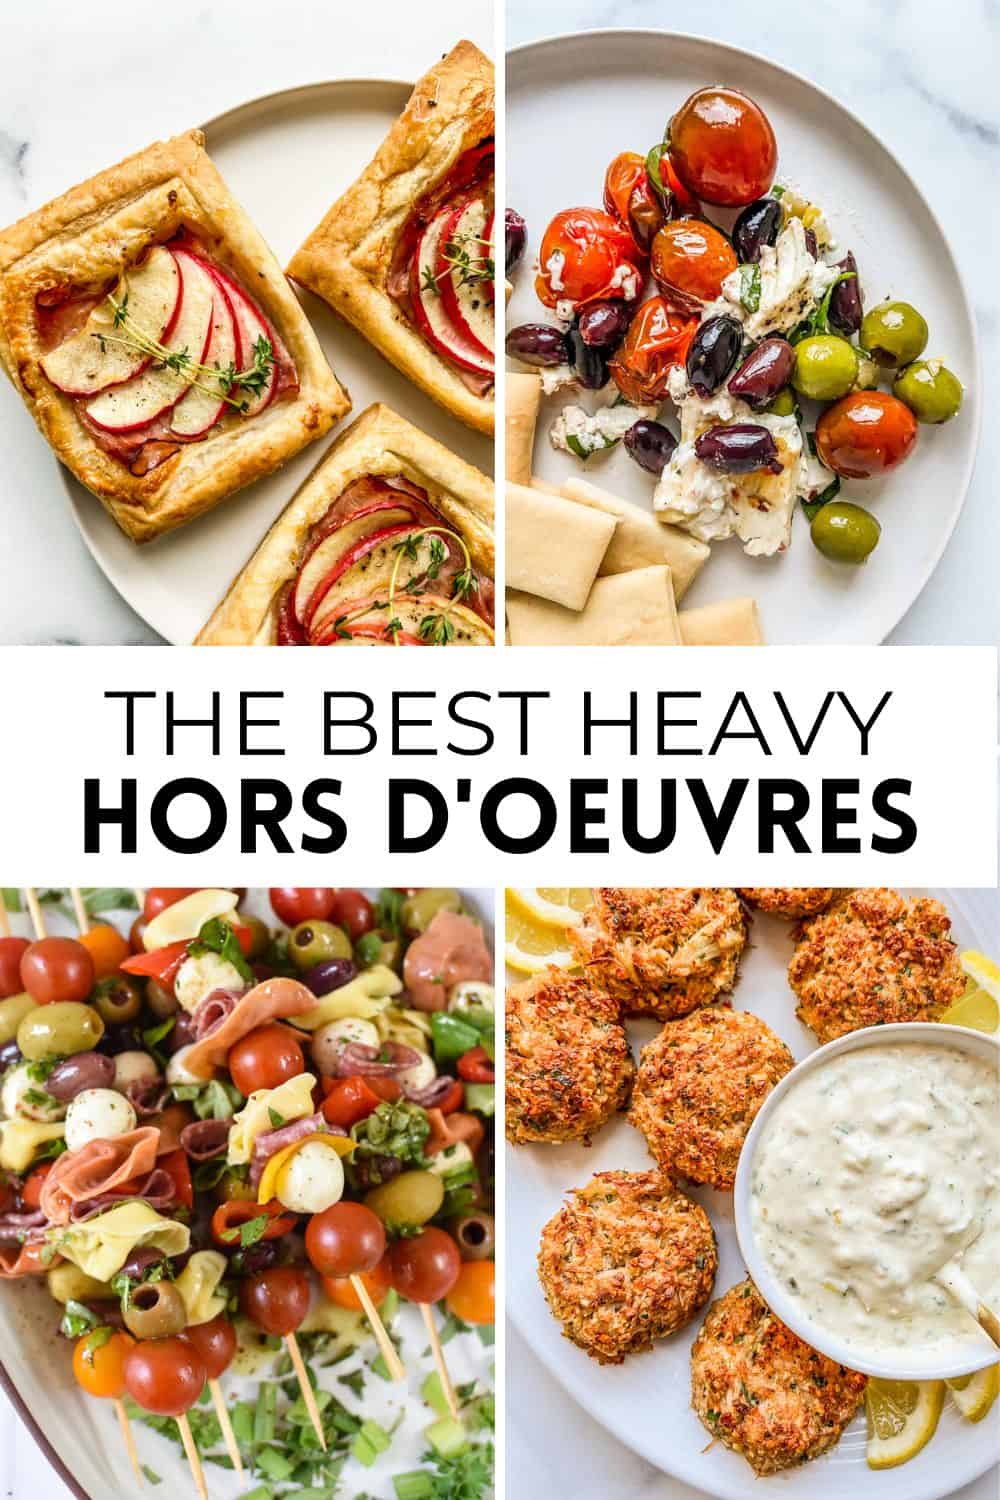 25 Heavy Hors d'oeuvres for a Party - This Healthy Table